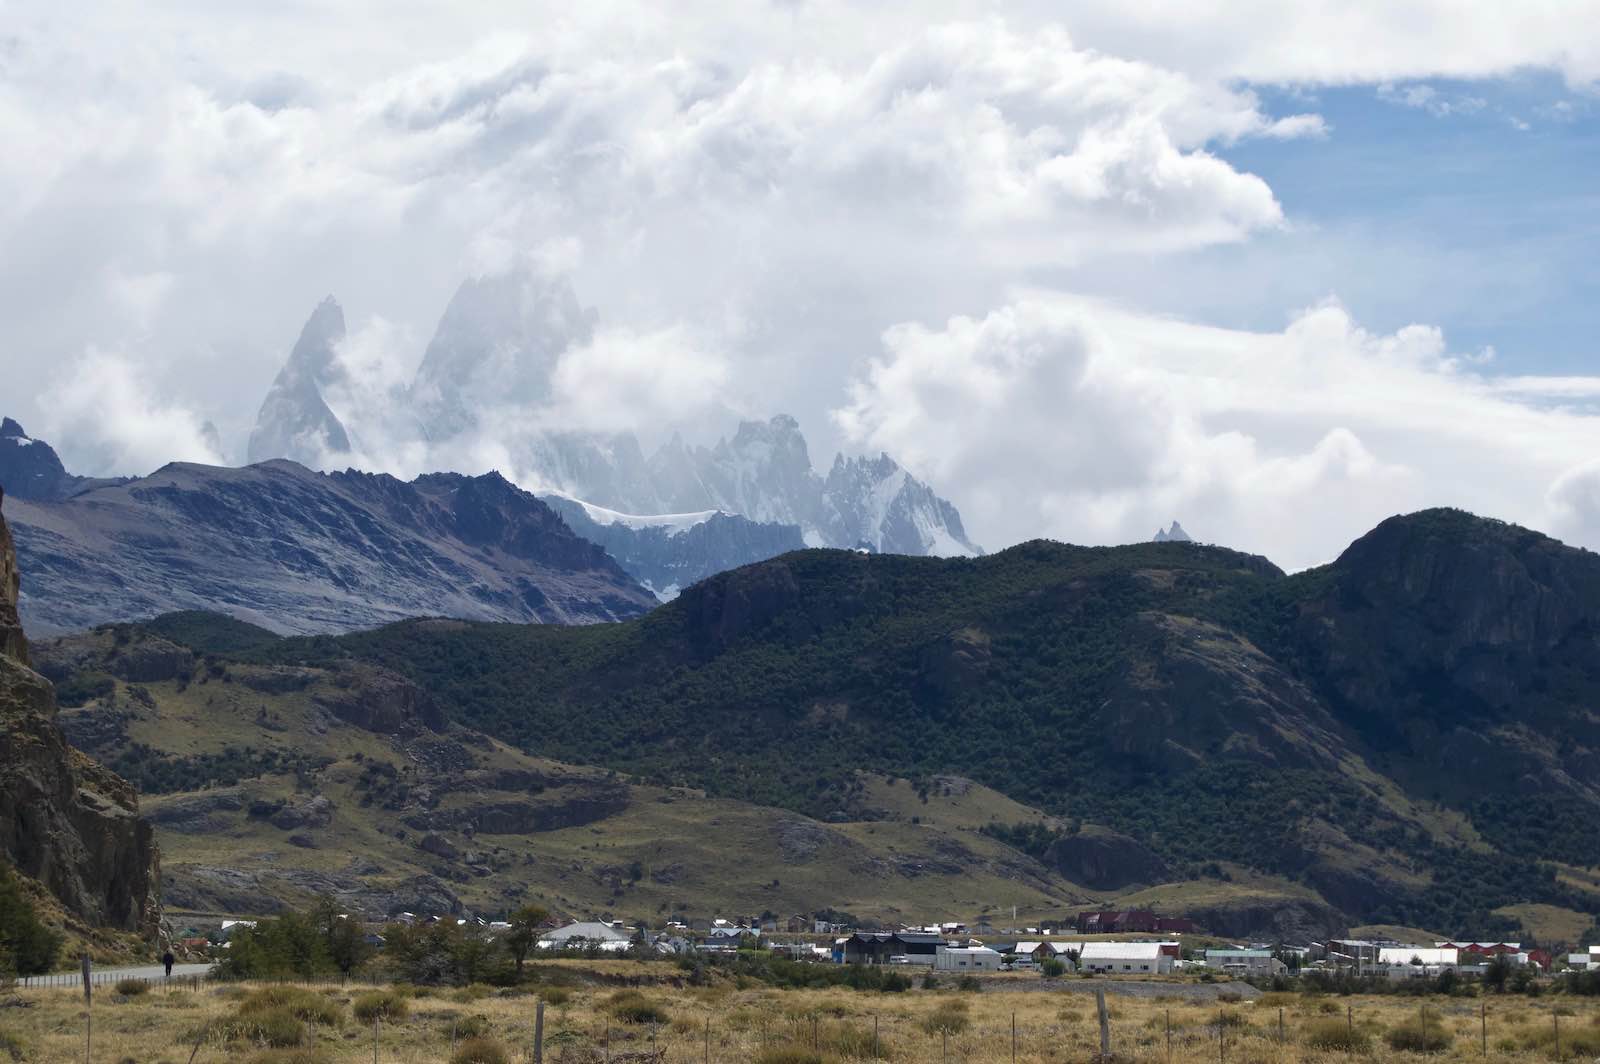 The town of El Chalten with the clouded image of Mount Fitz Roy in the background.